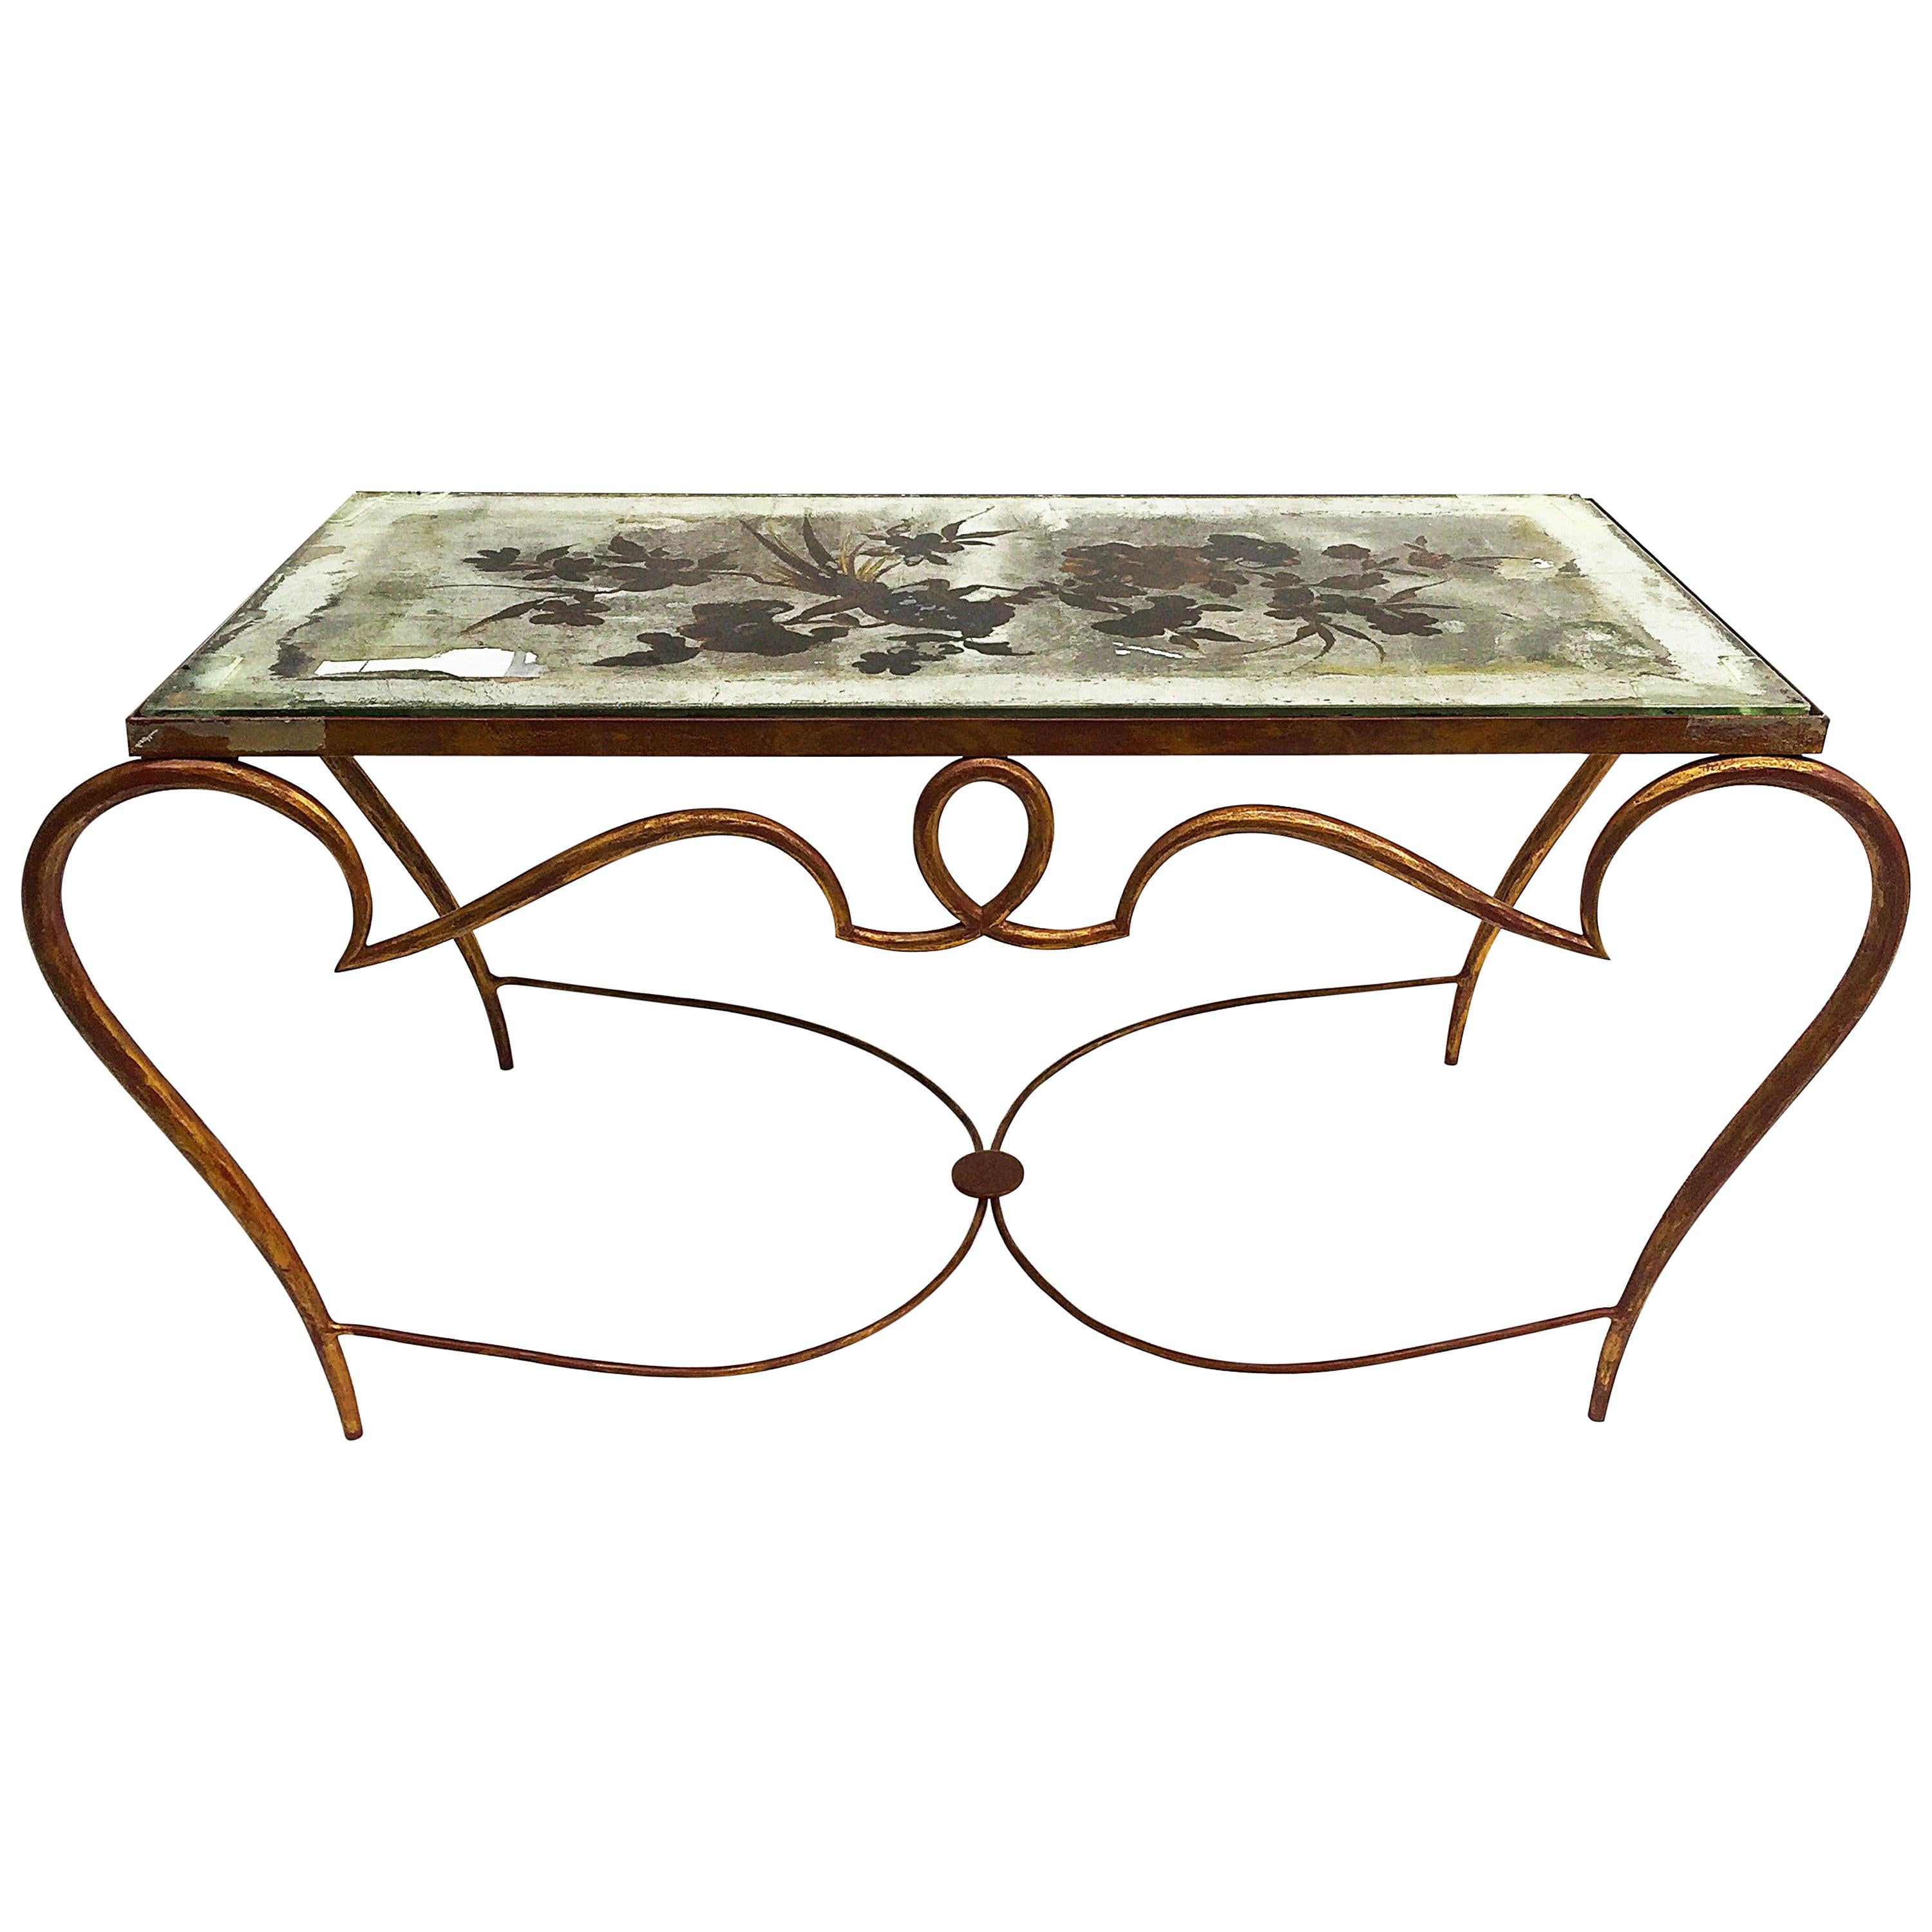 René Drouet Gilded Art Deco Cocktail Coffee Table with Silver Gilded Glass Top For Sale